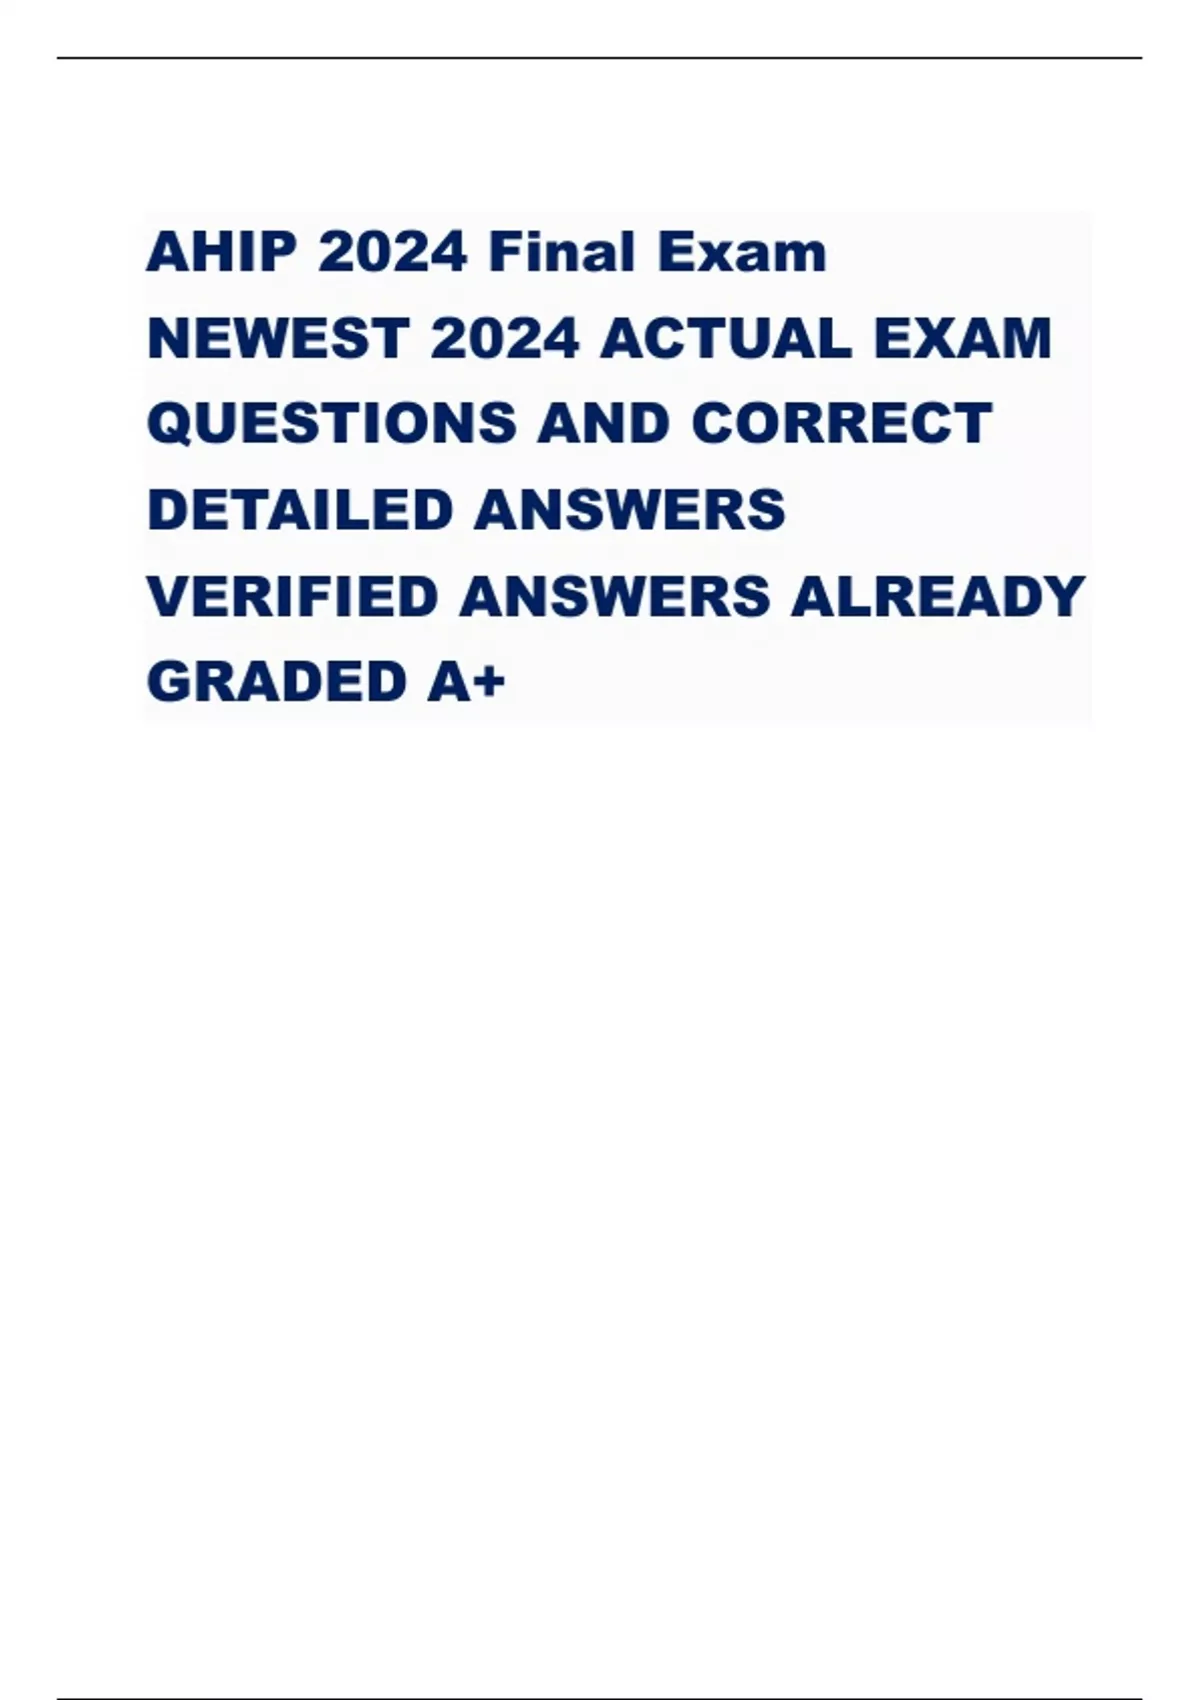 AHIP 2024 Final Exam NEWEST 2024 ACTUAL EXAM QUESTIONS AND CORRECT